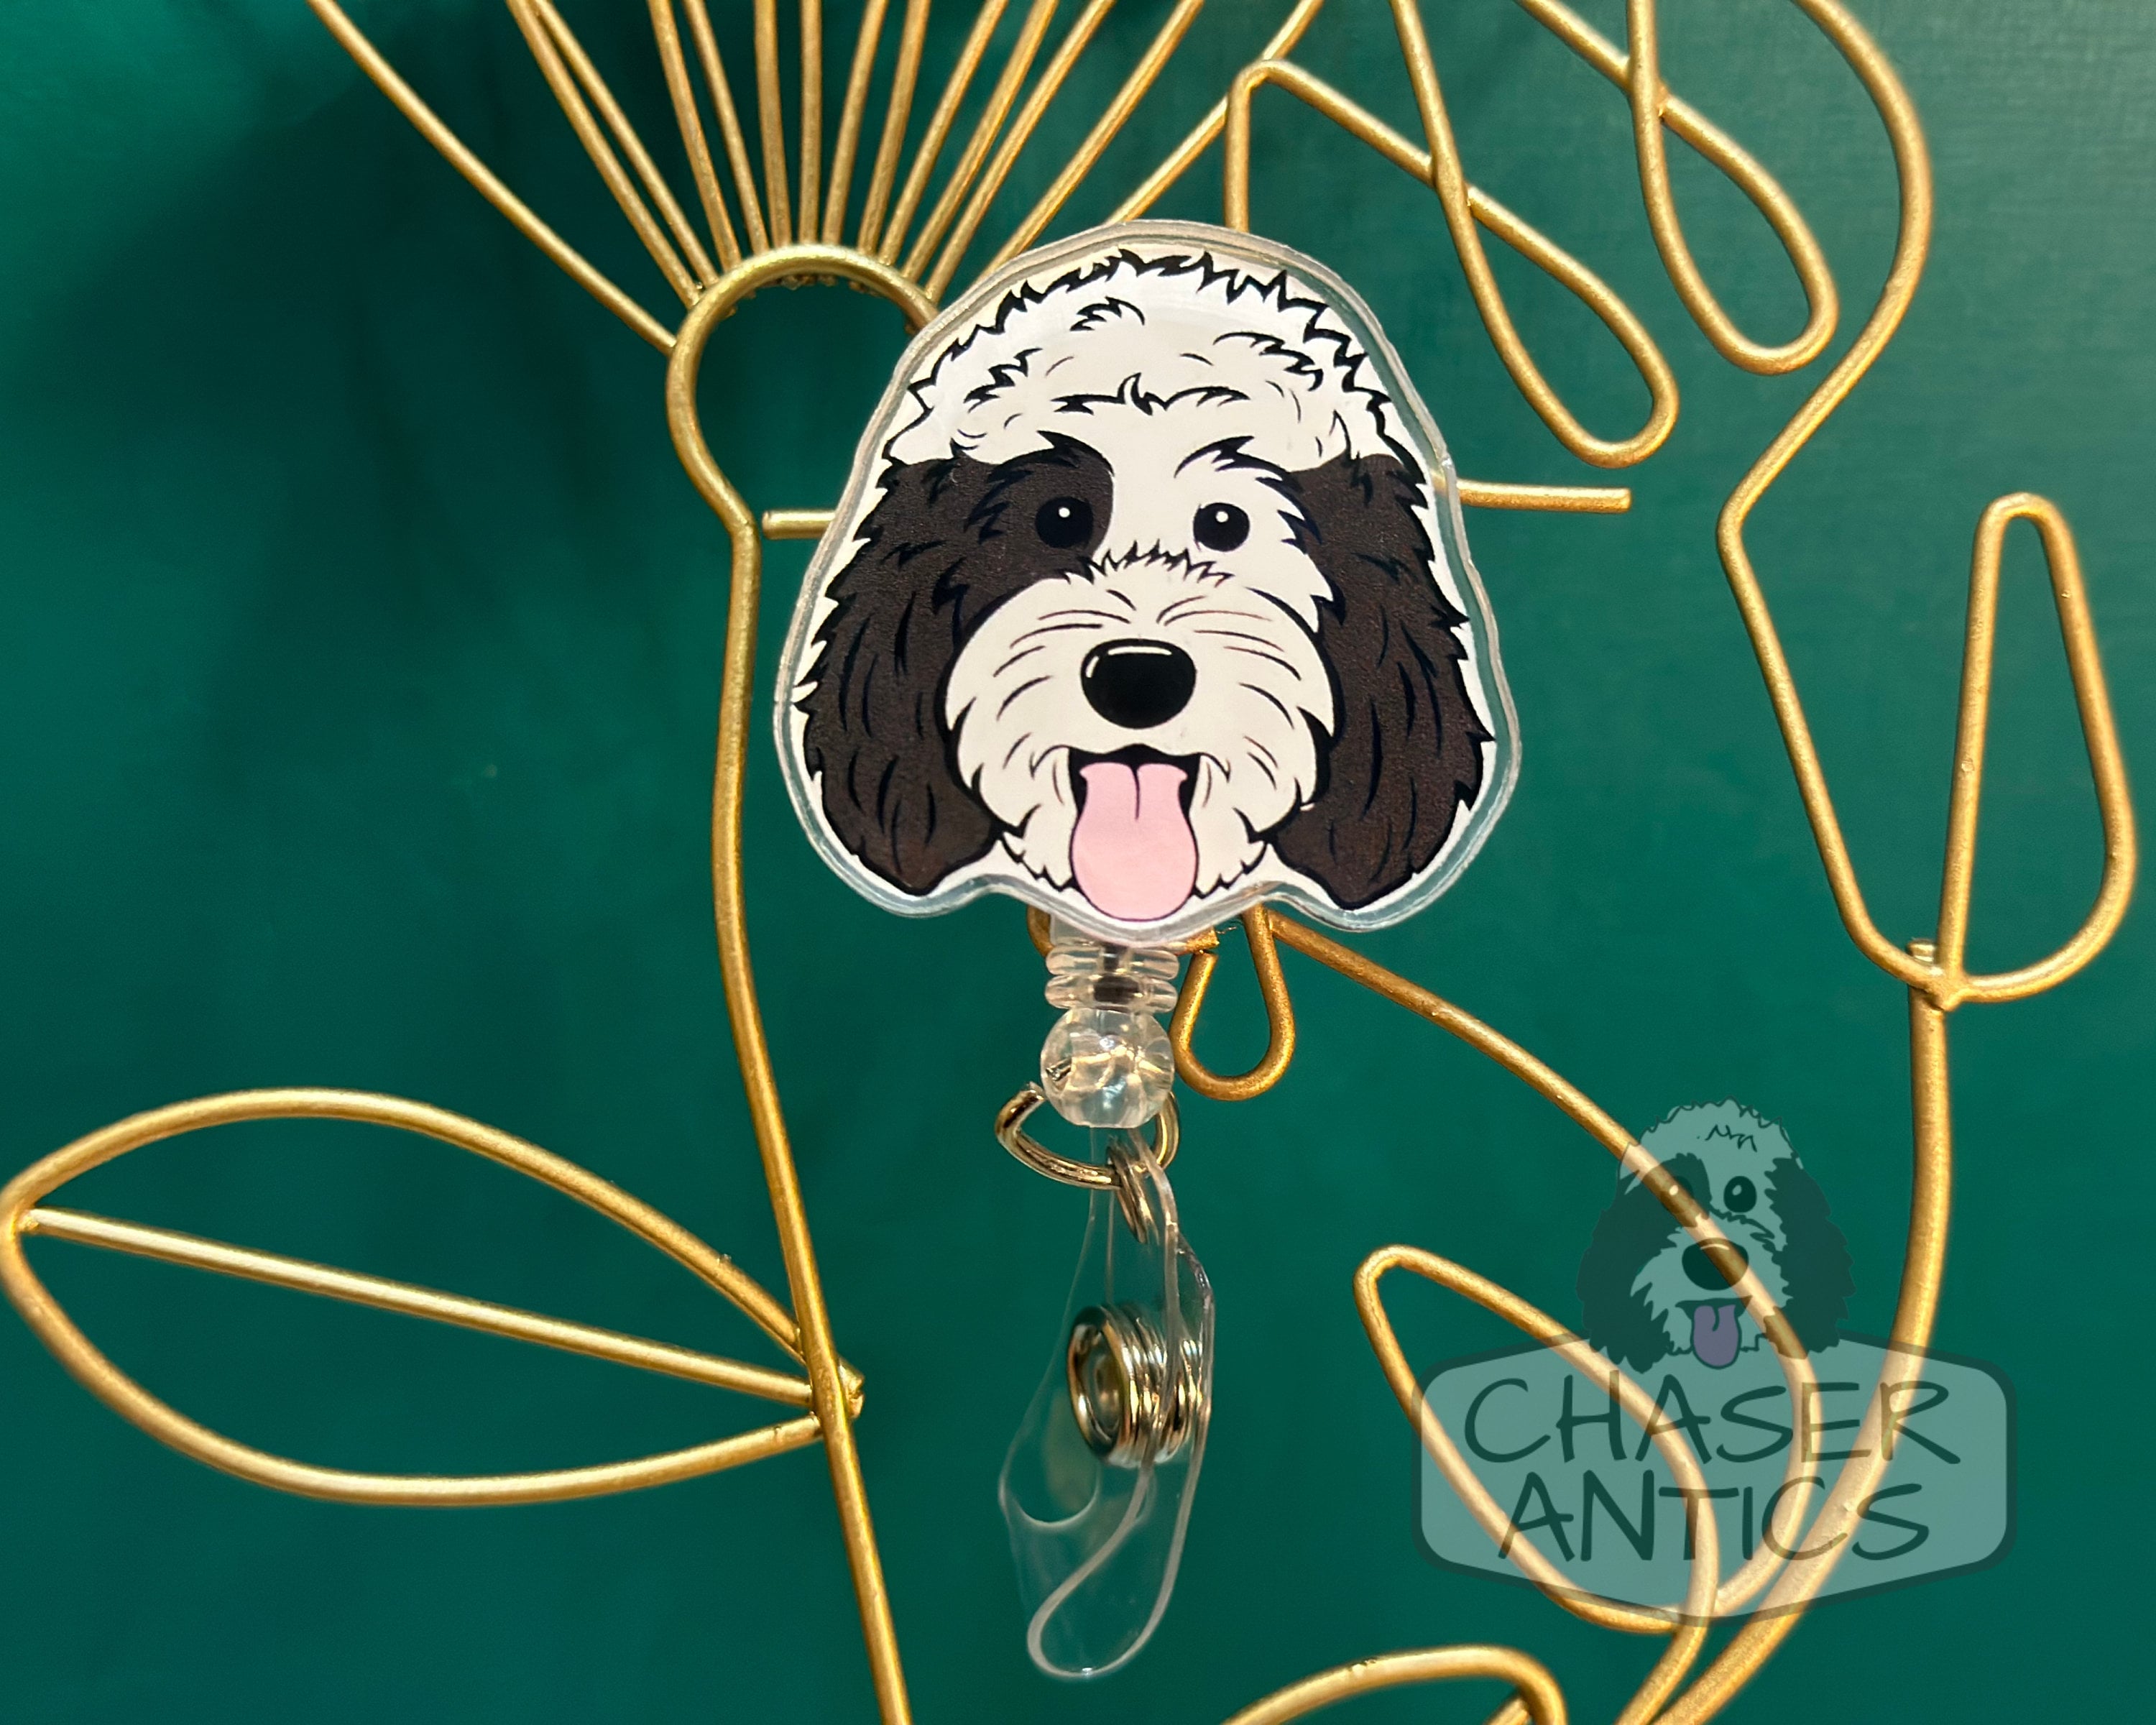 Tan Rubydo Shaped Doodle Girl With Bow Badge Reel Goldendoodle